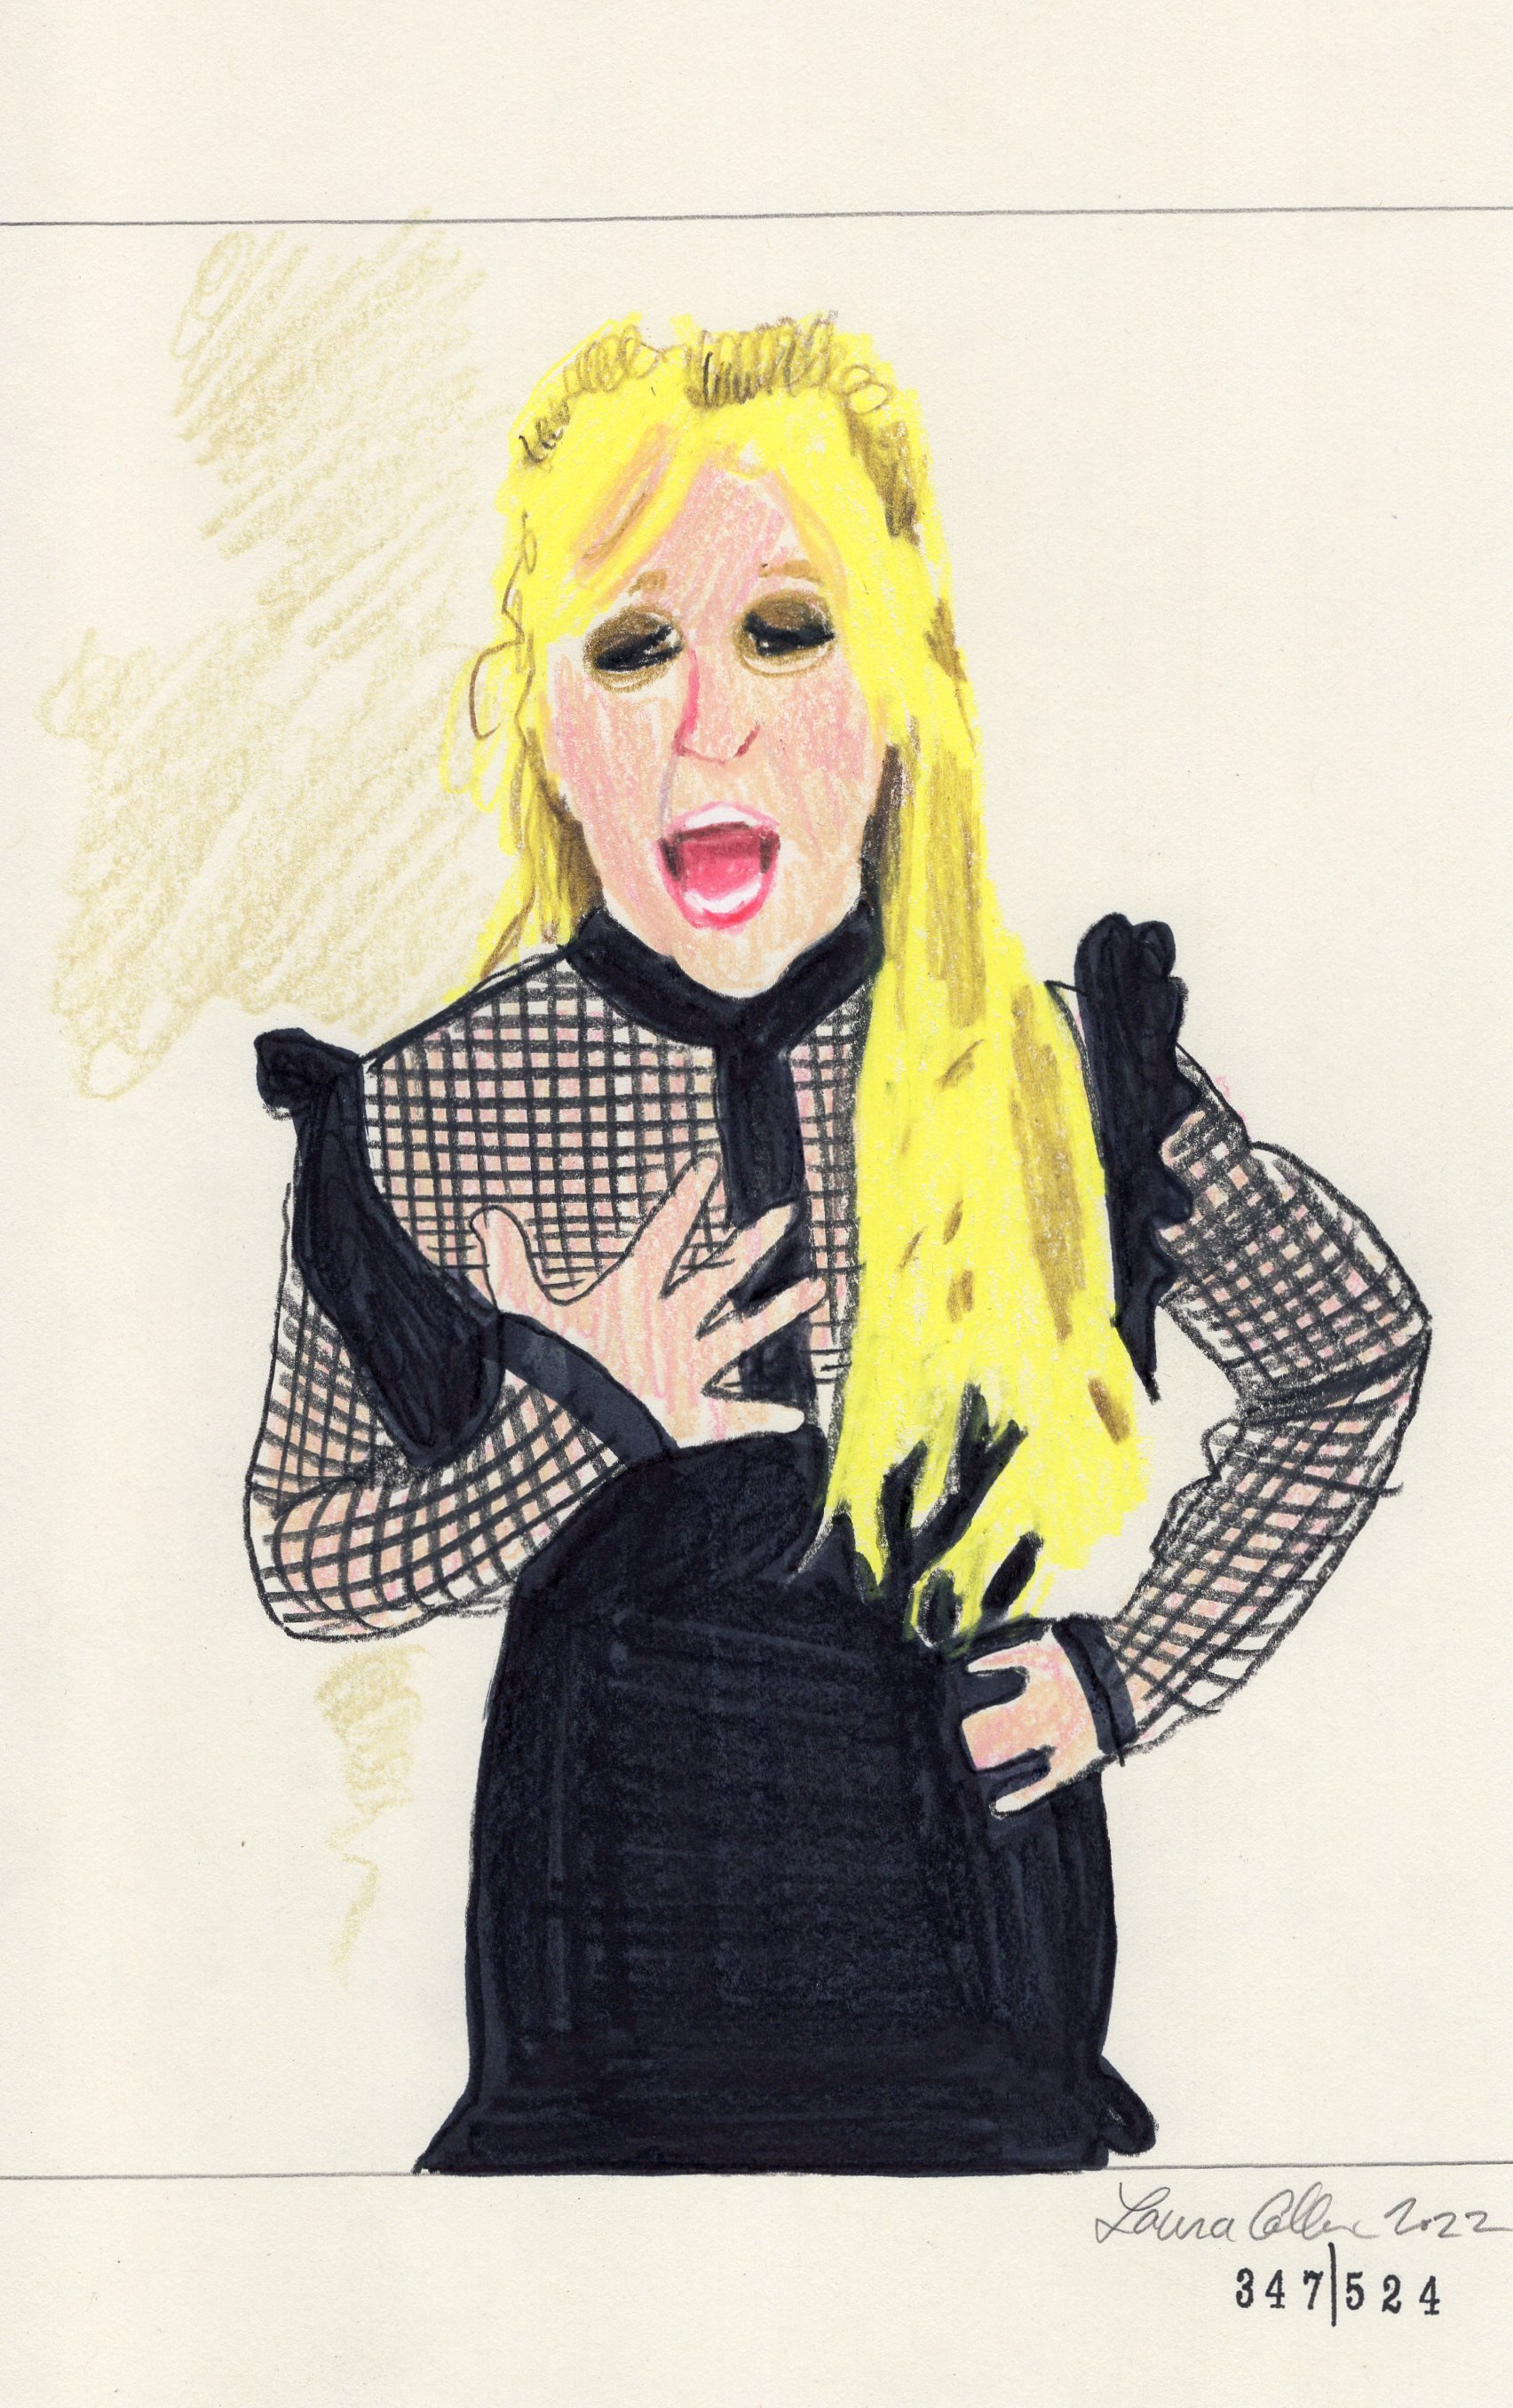 Laura Collins Britney Spears Animation 6x9in mixed media 2022 no347.jpg